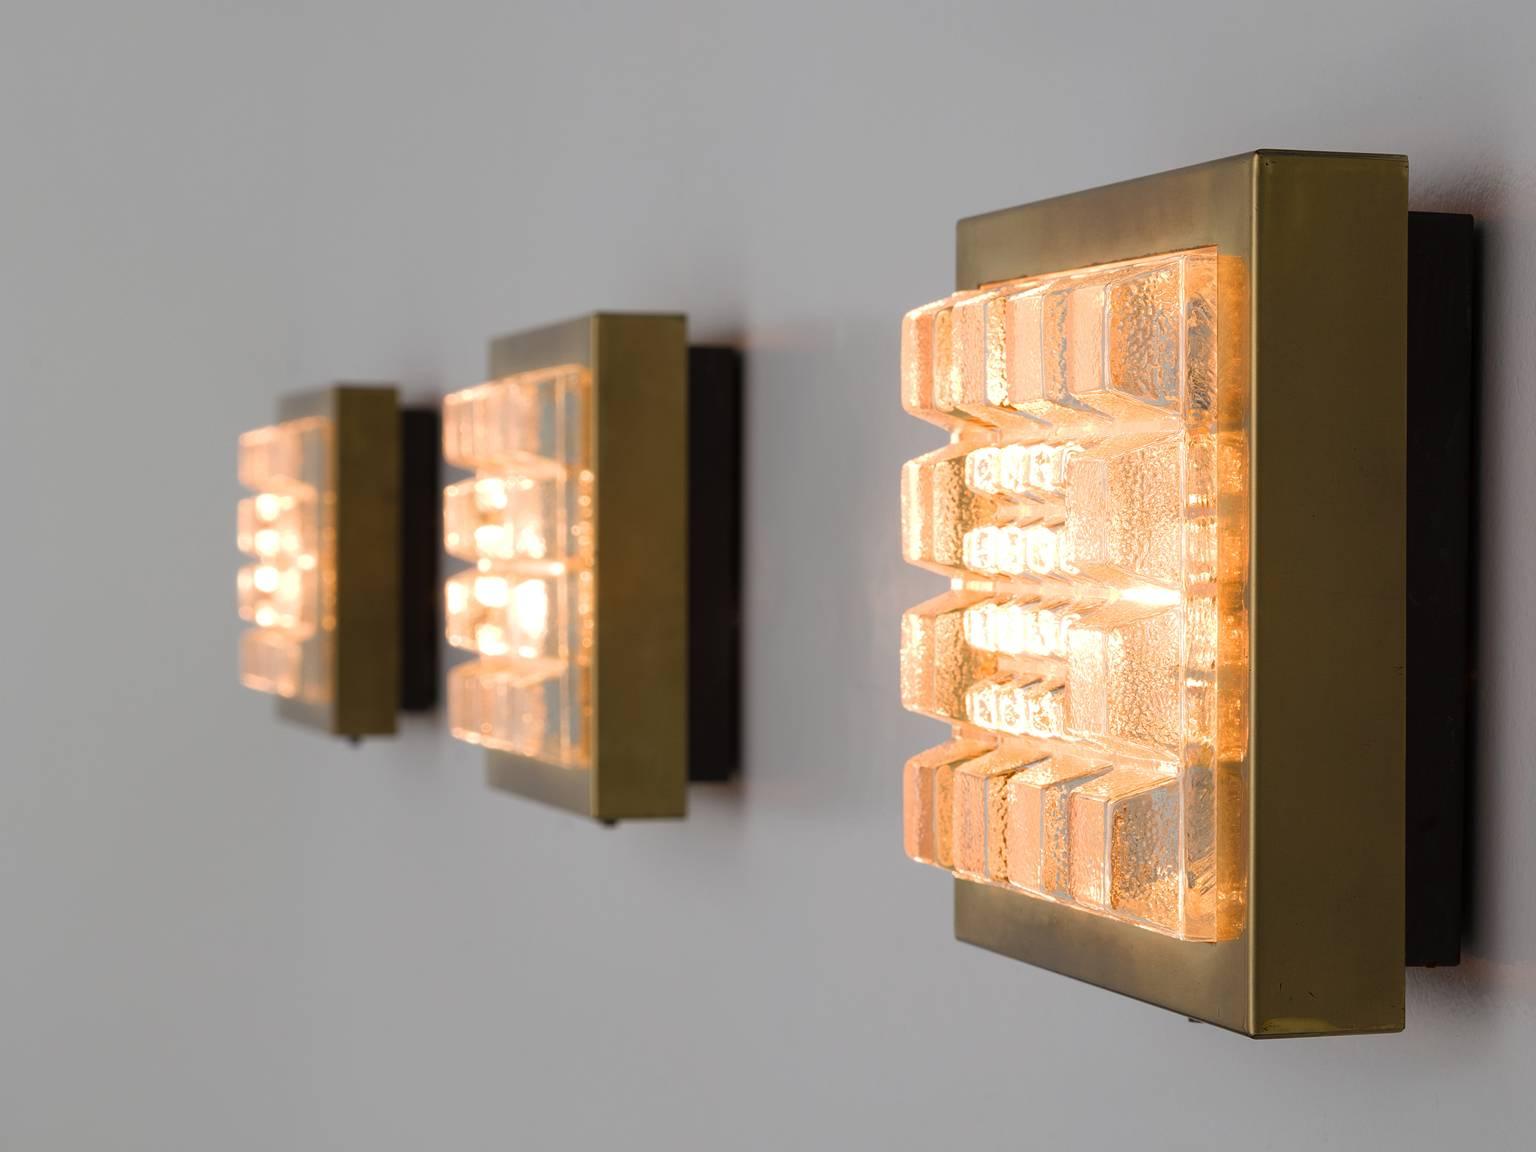 Wall lights, brass and structured glass, Belgium, 1930s.

These Art Deco wall lights are solid and sculptural. The square sconces have protruding structured glass squares in a brass frame. The light source which is behind the glass surface gives of